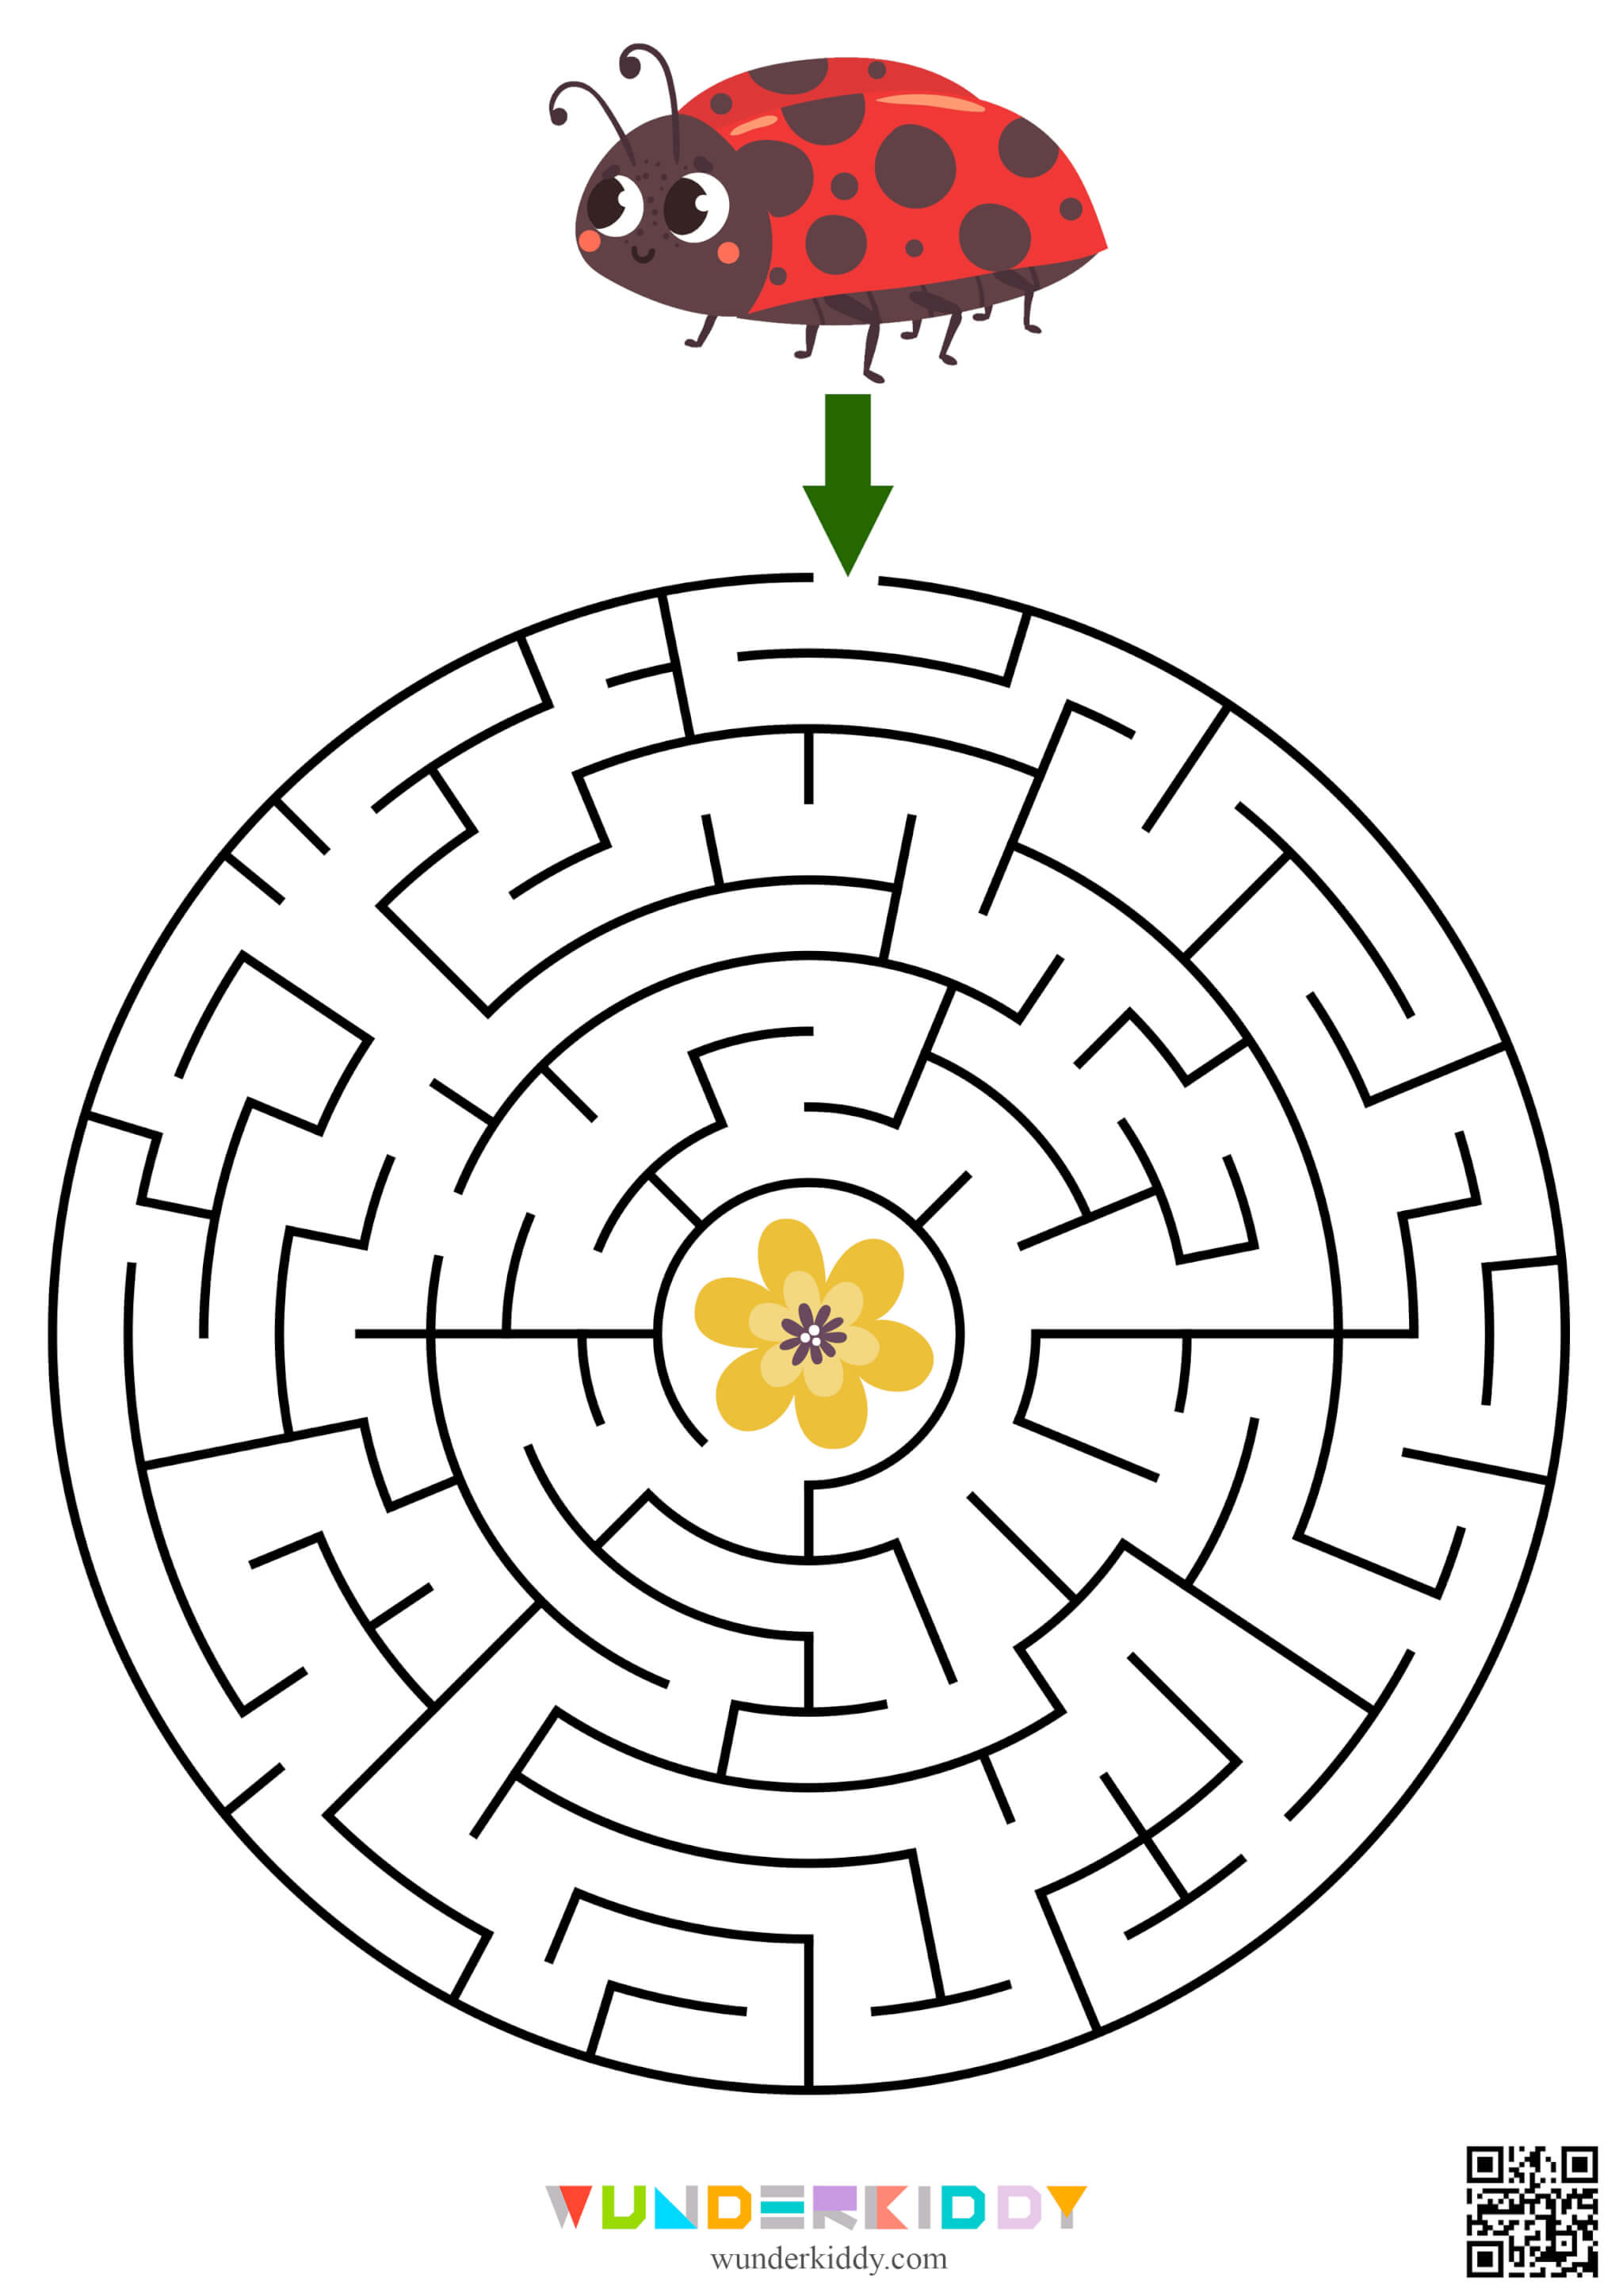 Printable Maze for Kids Help to Find the Way - Image 6